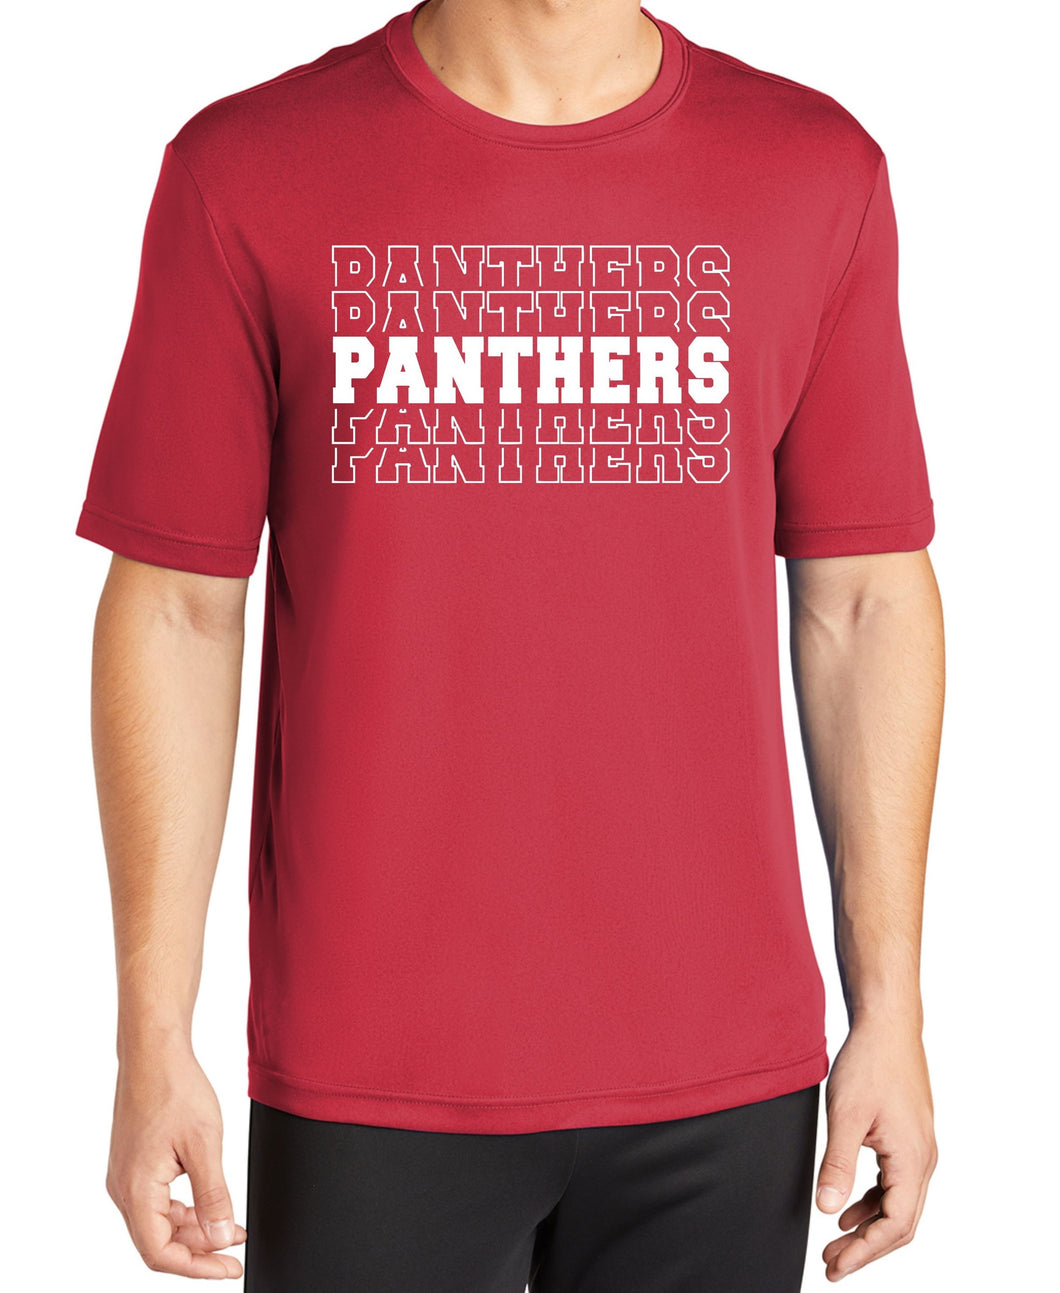 NEW *Unisex Red PANTHERS Short Sleeved Dry Fit T-Shirt*